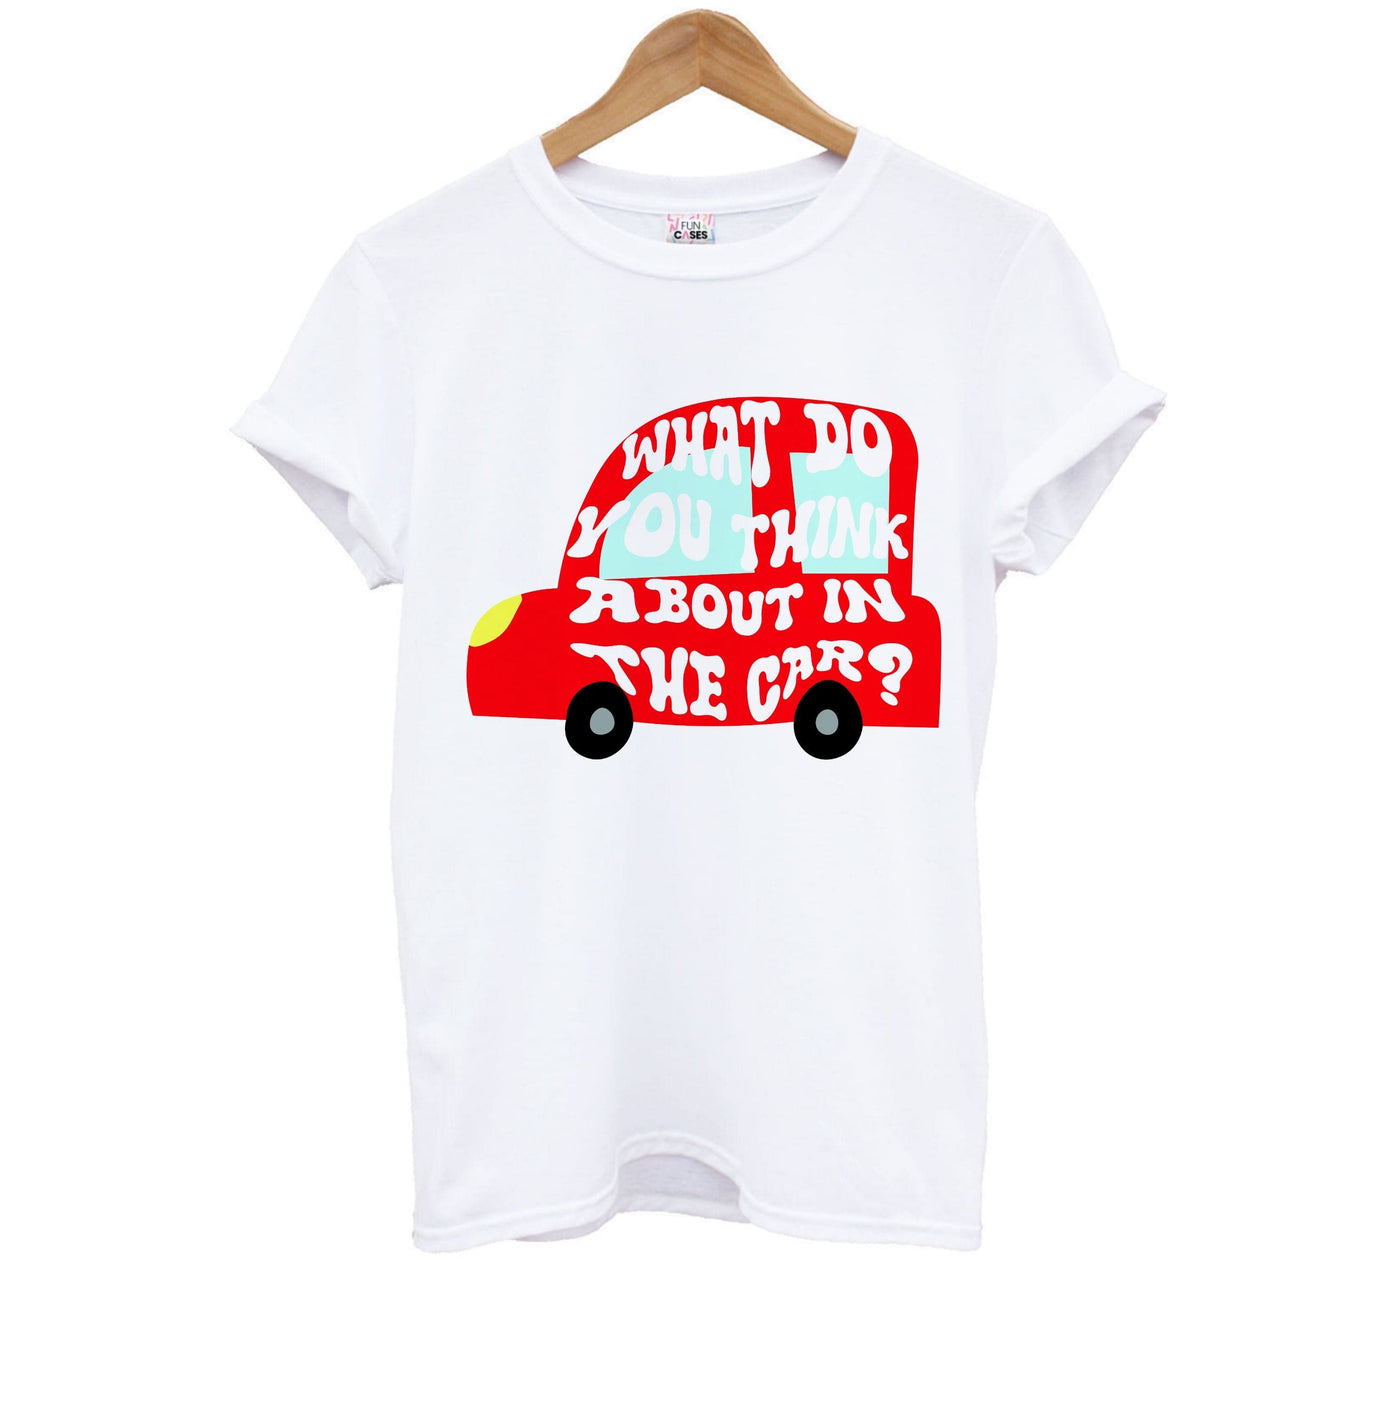 What Do You Think About In The Car? - Declan Mckenna Kids T-Shirt